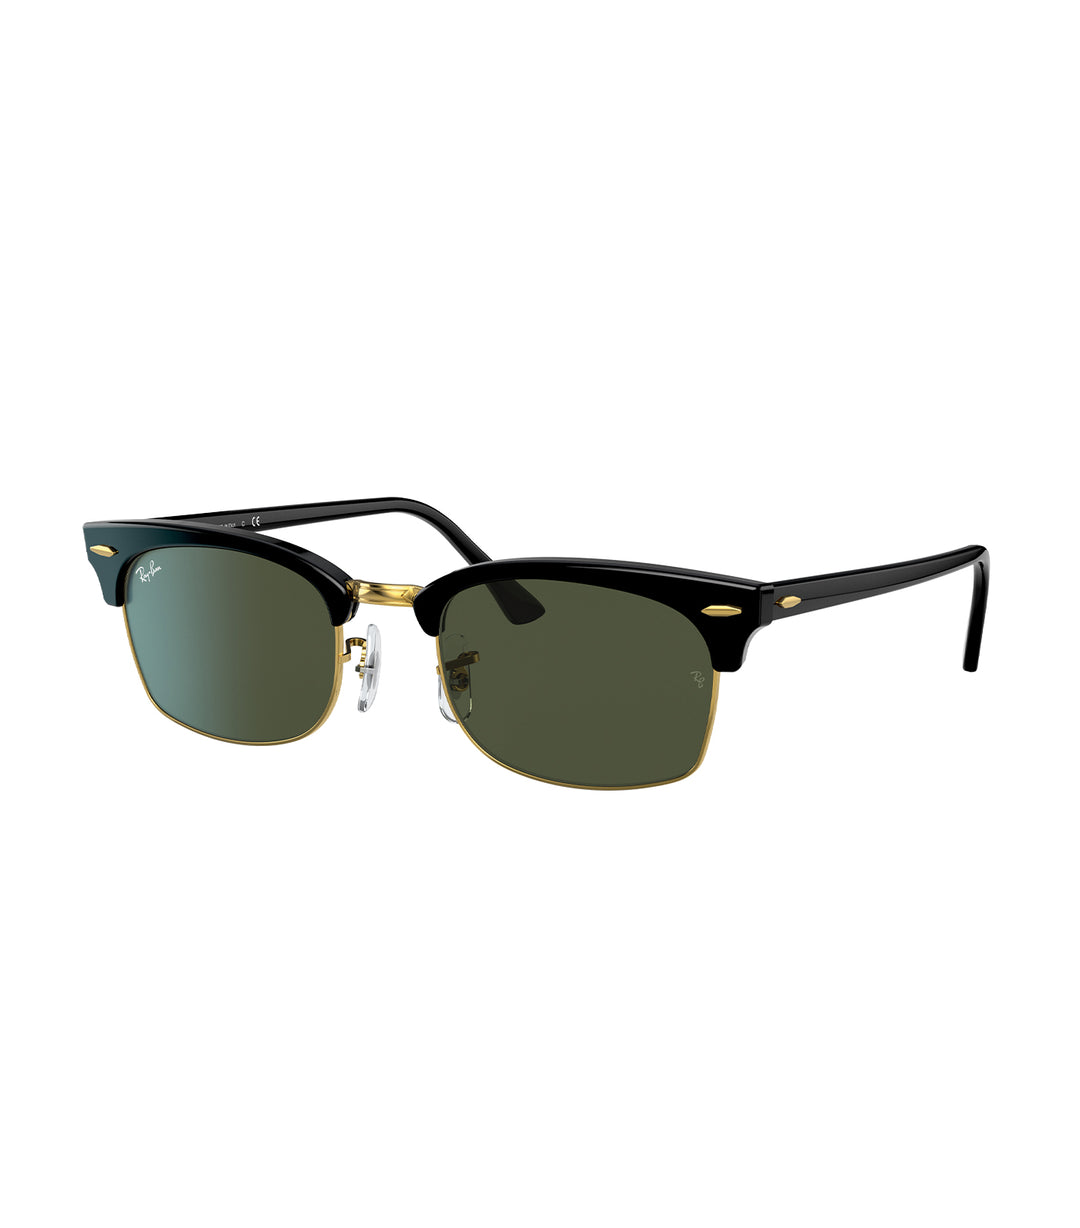 Clubmaster Square RB3916F/1303/31 Black/Green